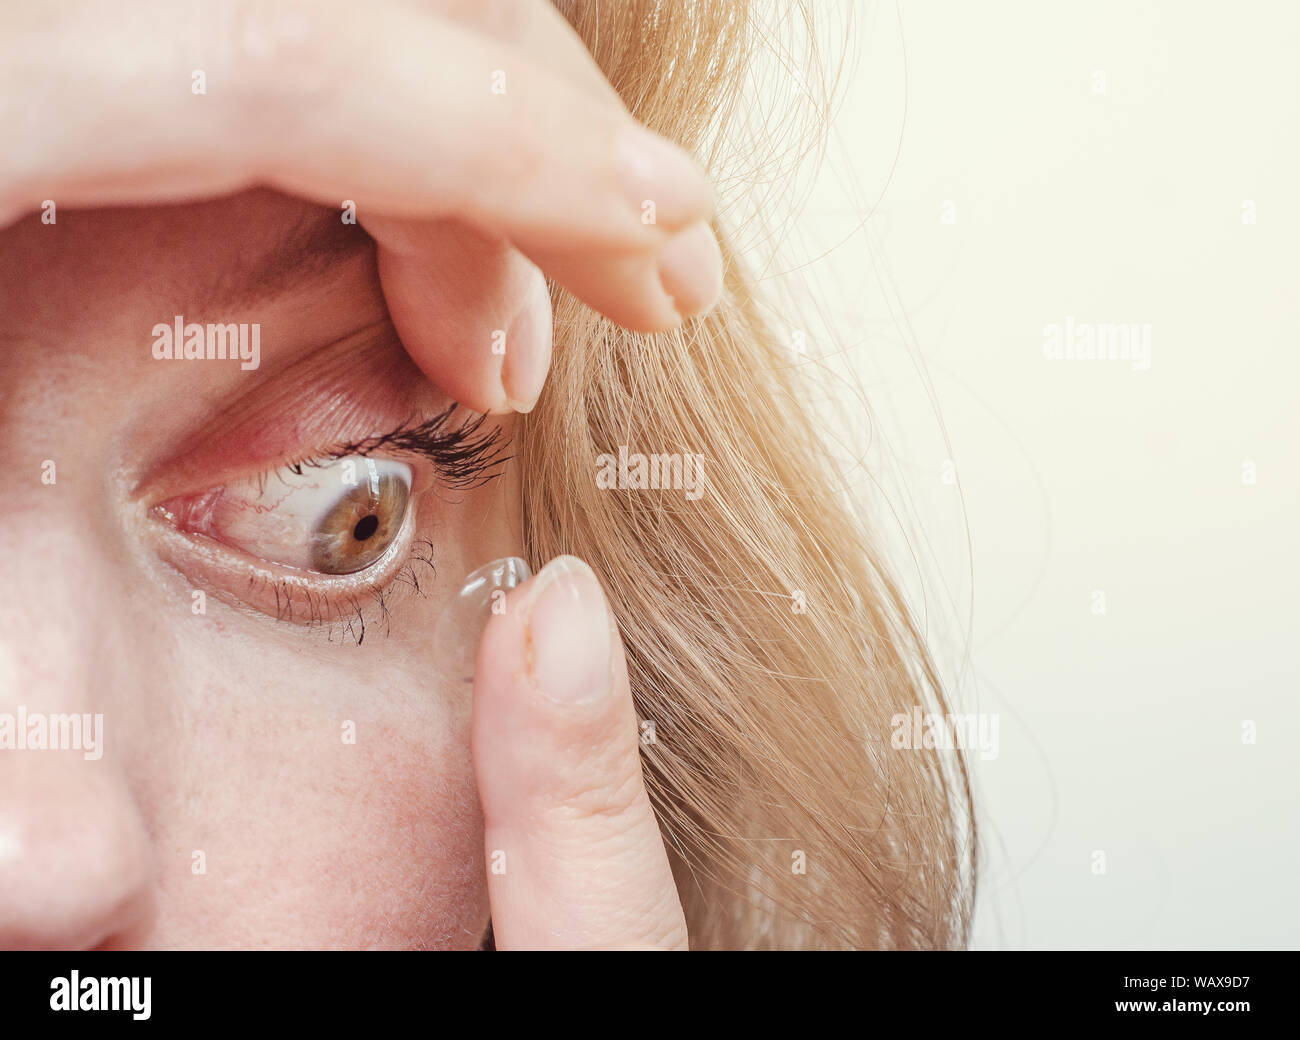 Woman inserts a contact lens into the eye. Close-up, domestic scene.  Optics, Vision, Optical Instruments Stock Photo - Alamy